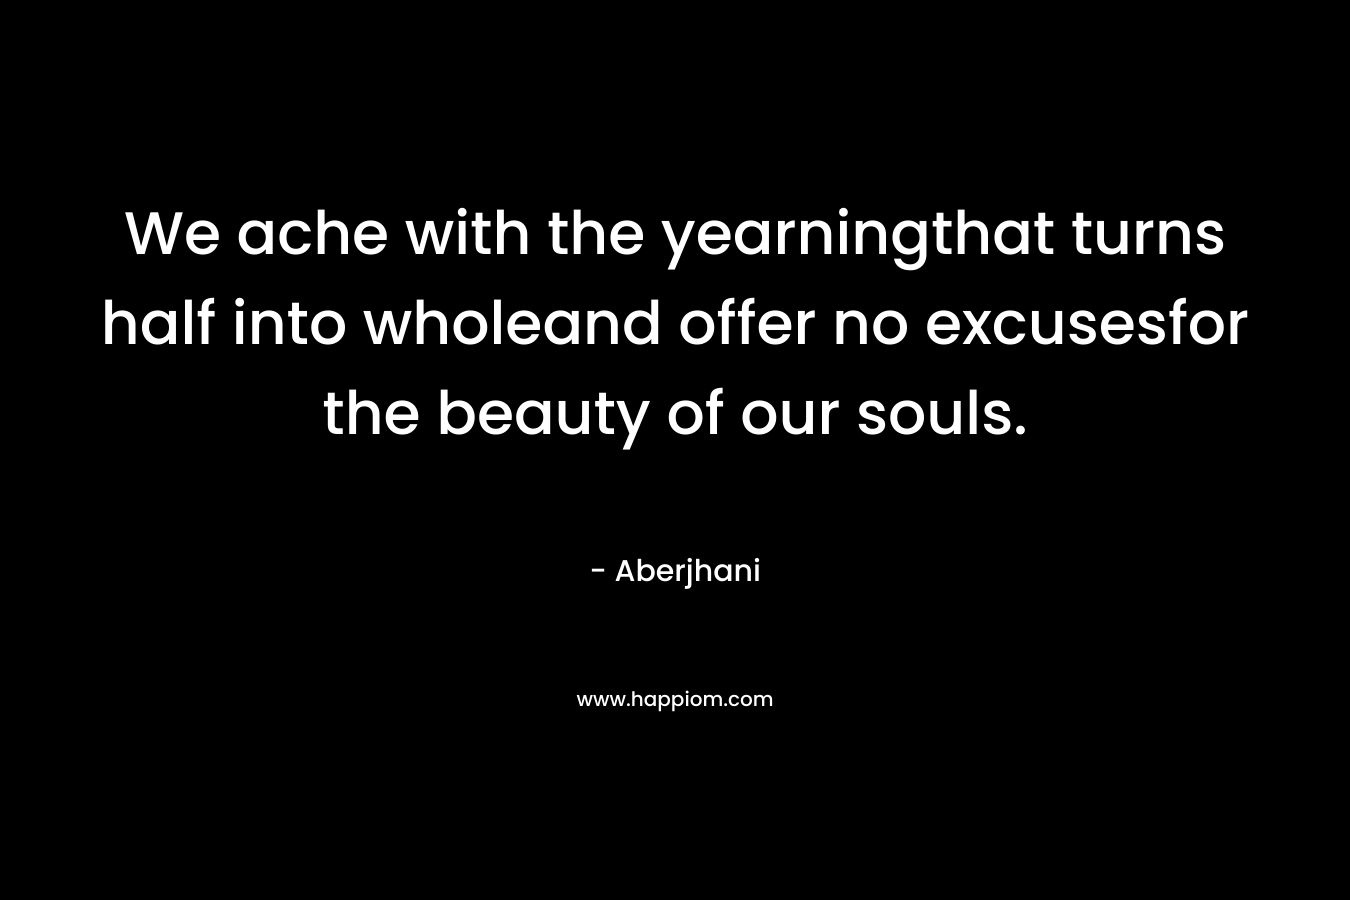 We ache with the yearningthat turns half into wholeand offer no excusesfor the beauty of our souls.